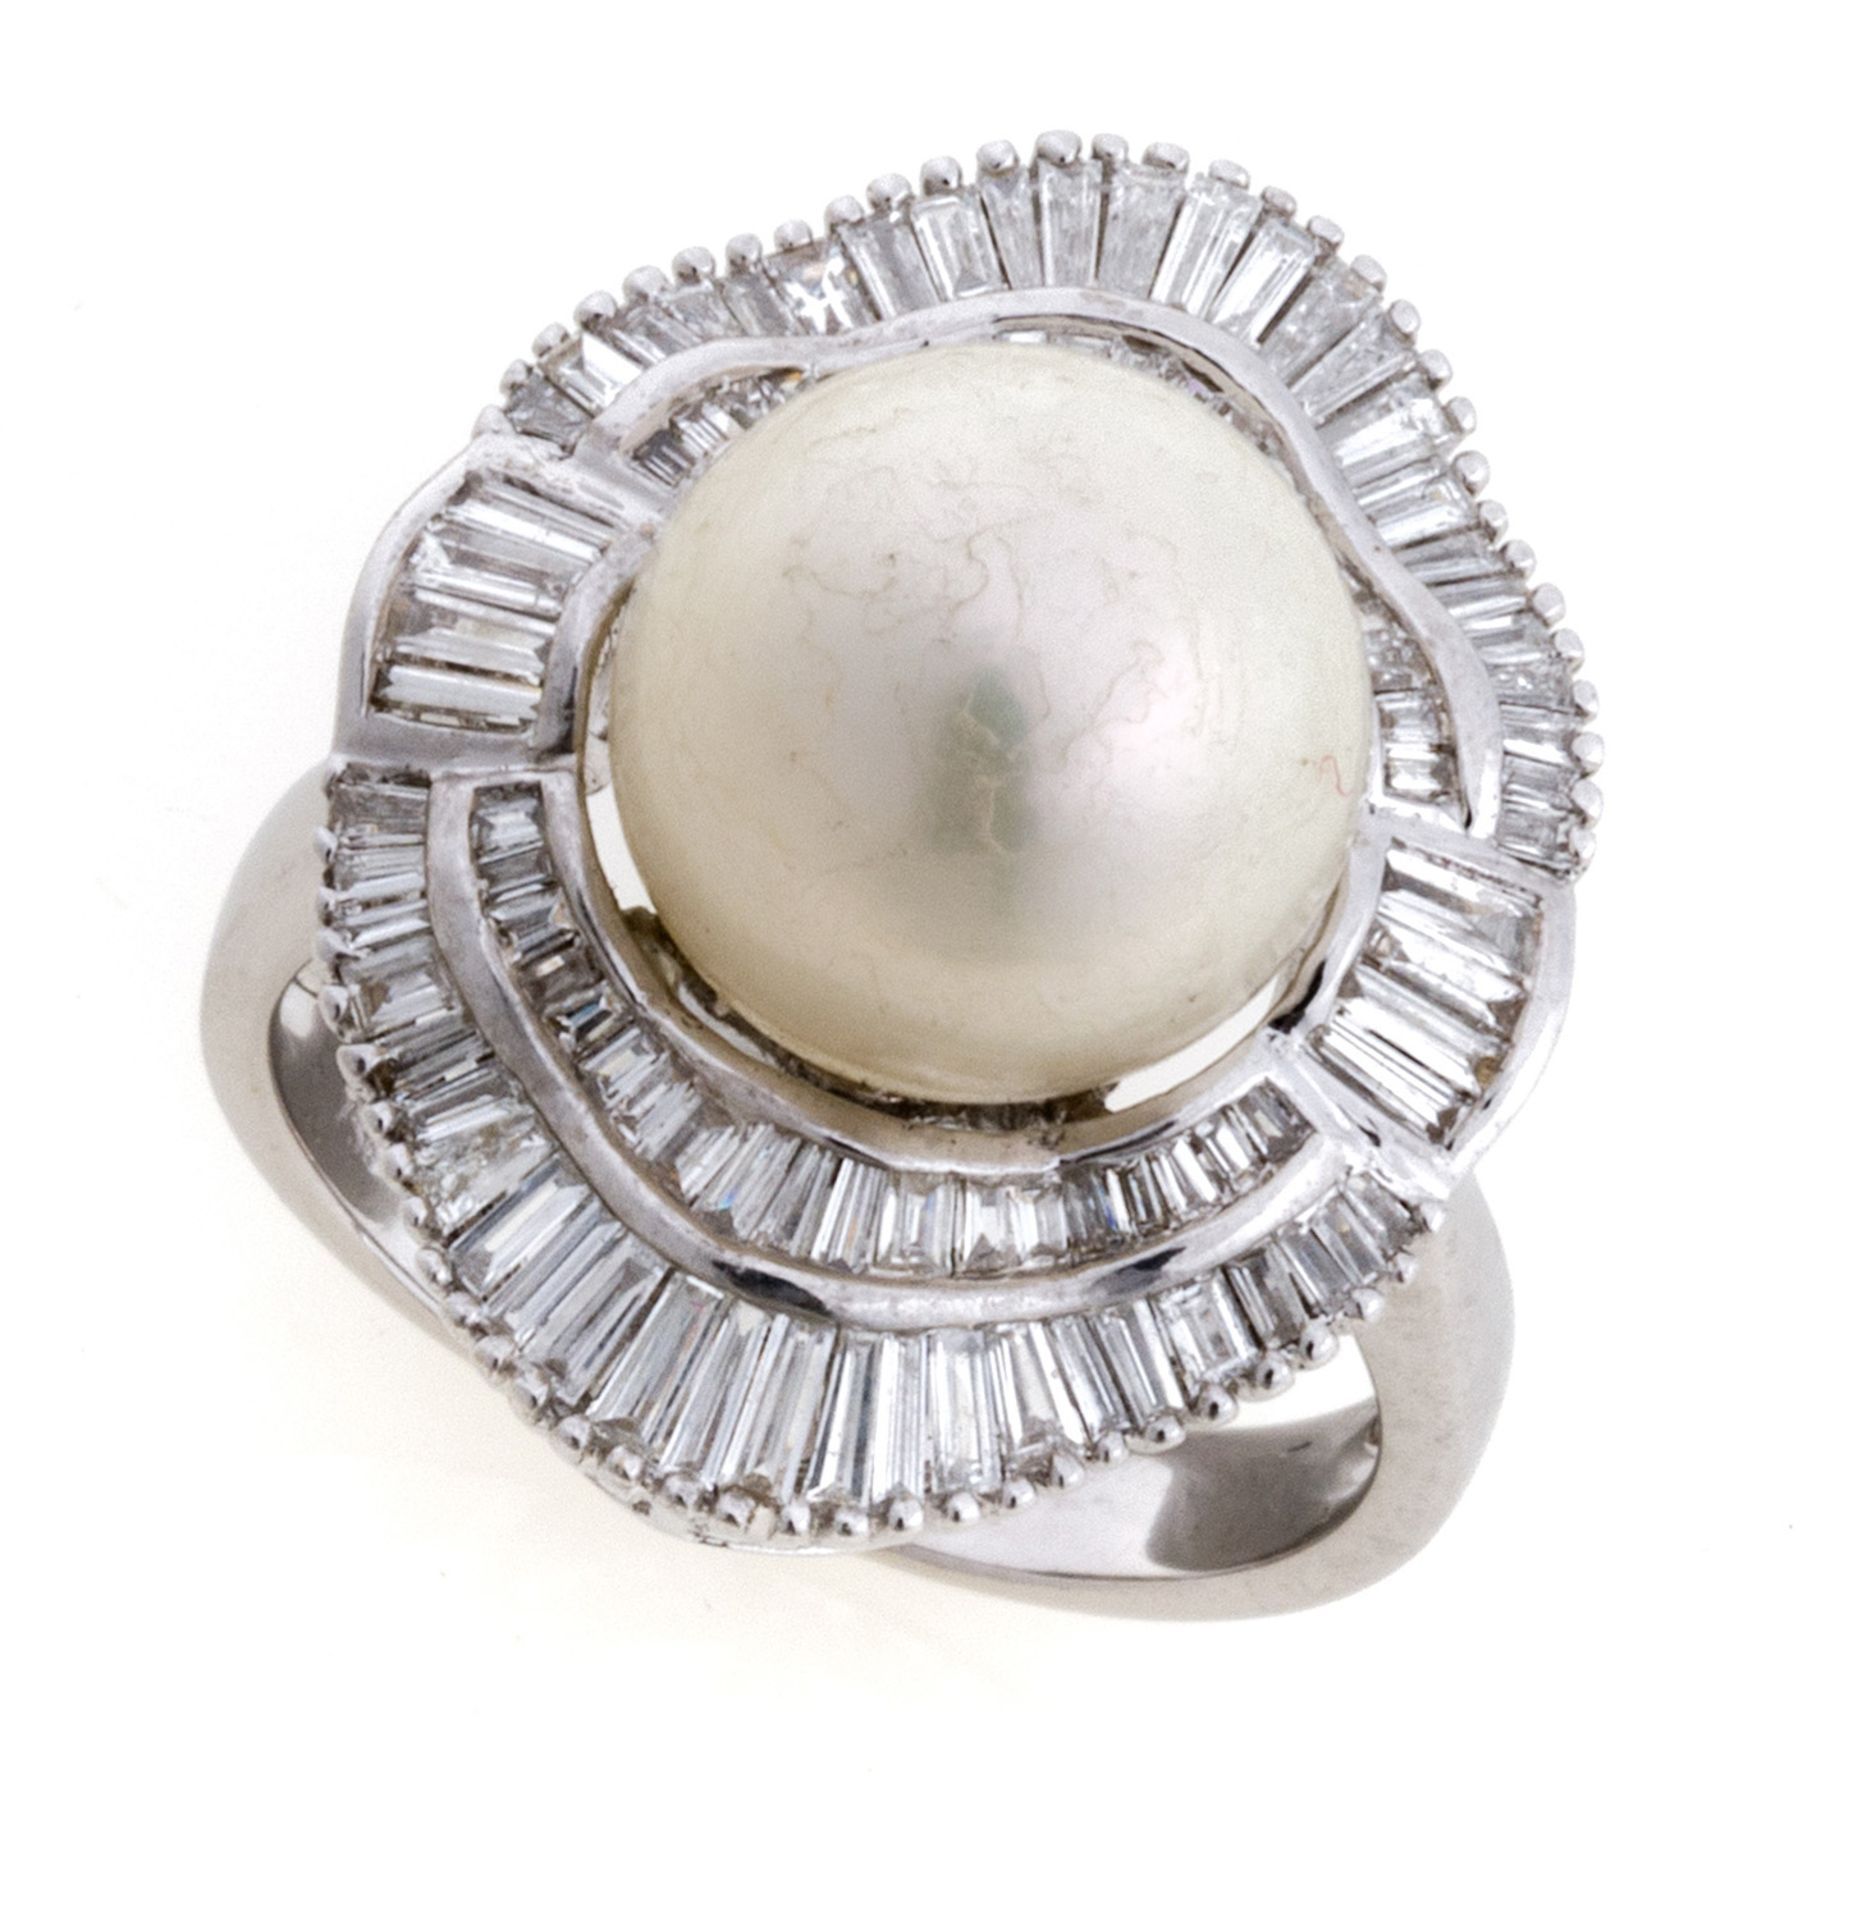 WHITE GOLD RING WITH PEARL AND DIAMONDS